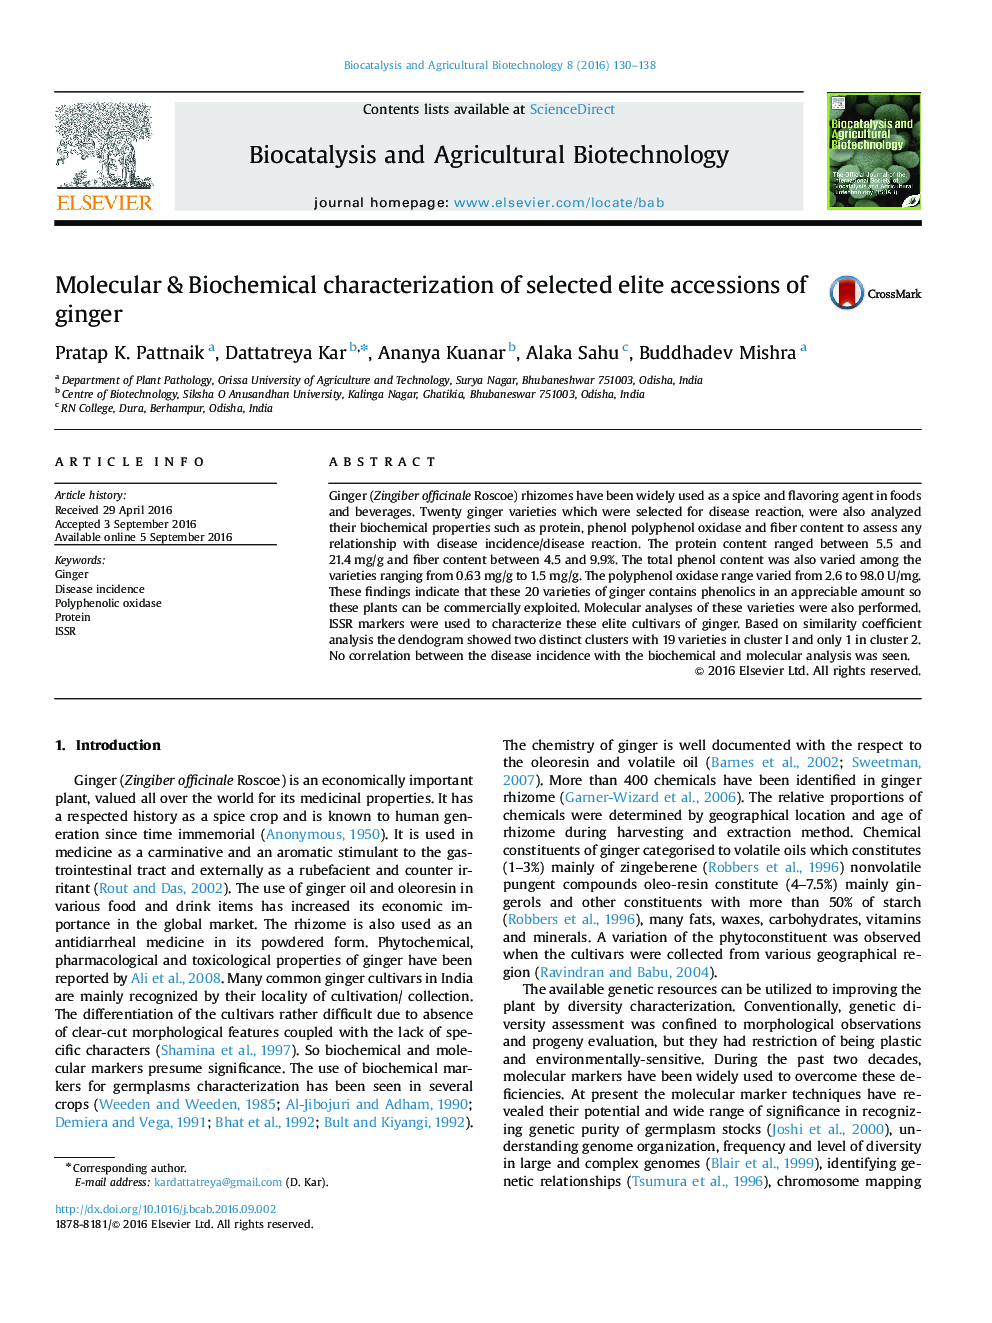 Molecular & Biochemical characterization of selected elite accessions of ginger